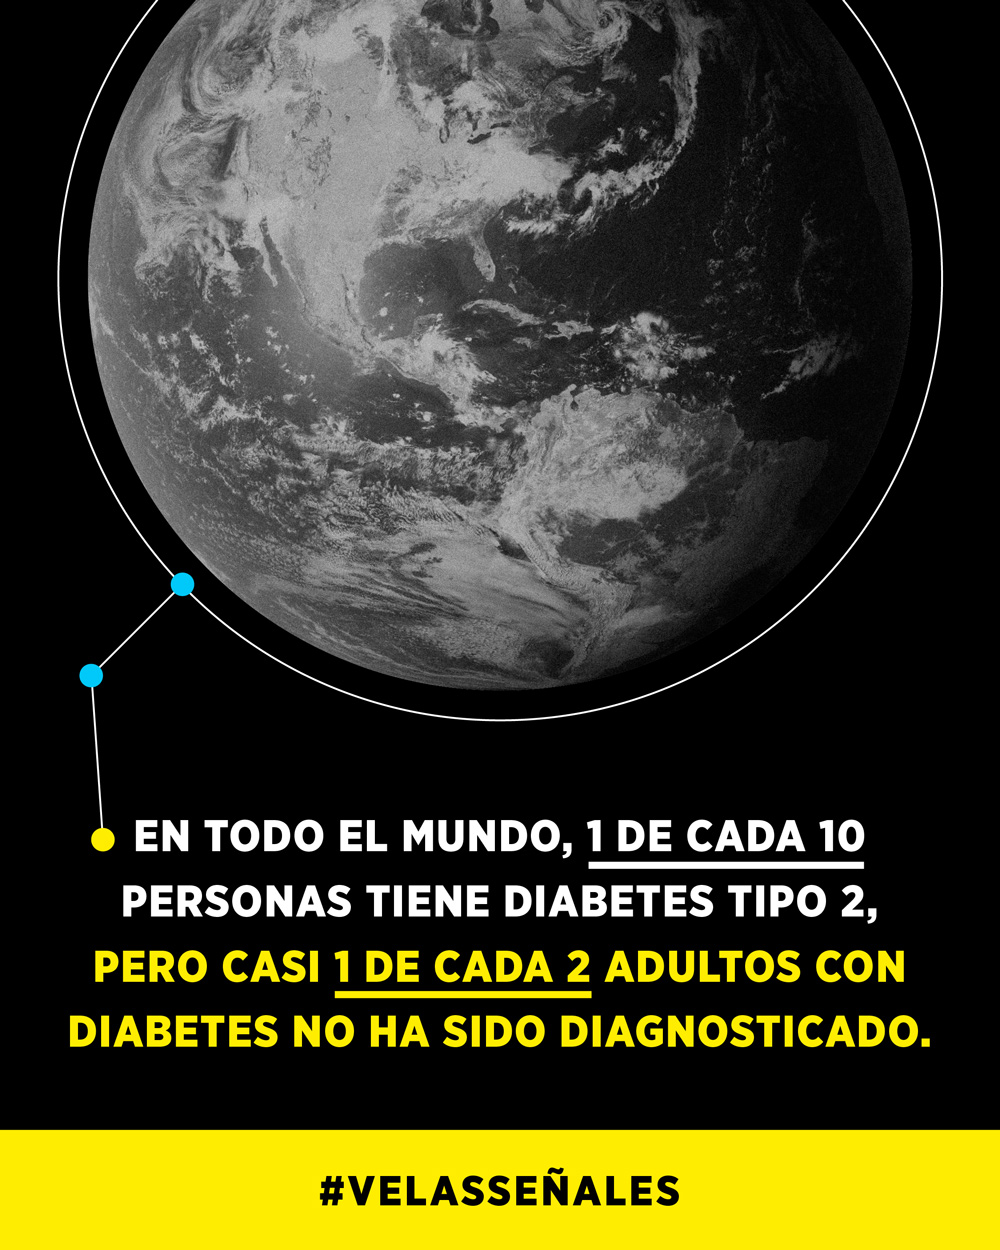 Globally, 1 in 10 people have type 2 diabetes but almost 1 in 2 adults with diabetes are undiagnosed